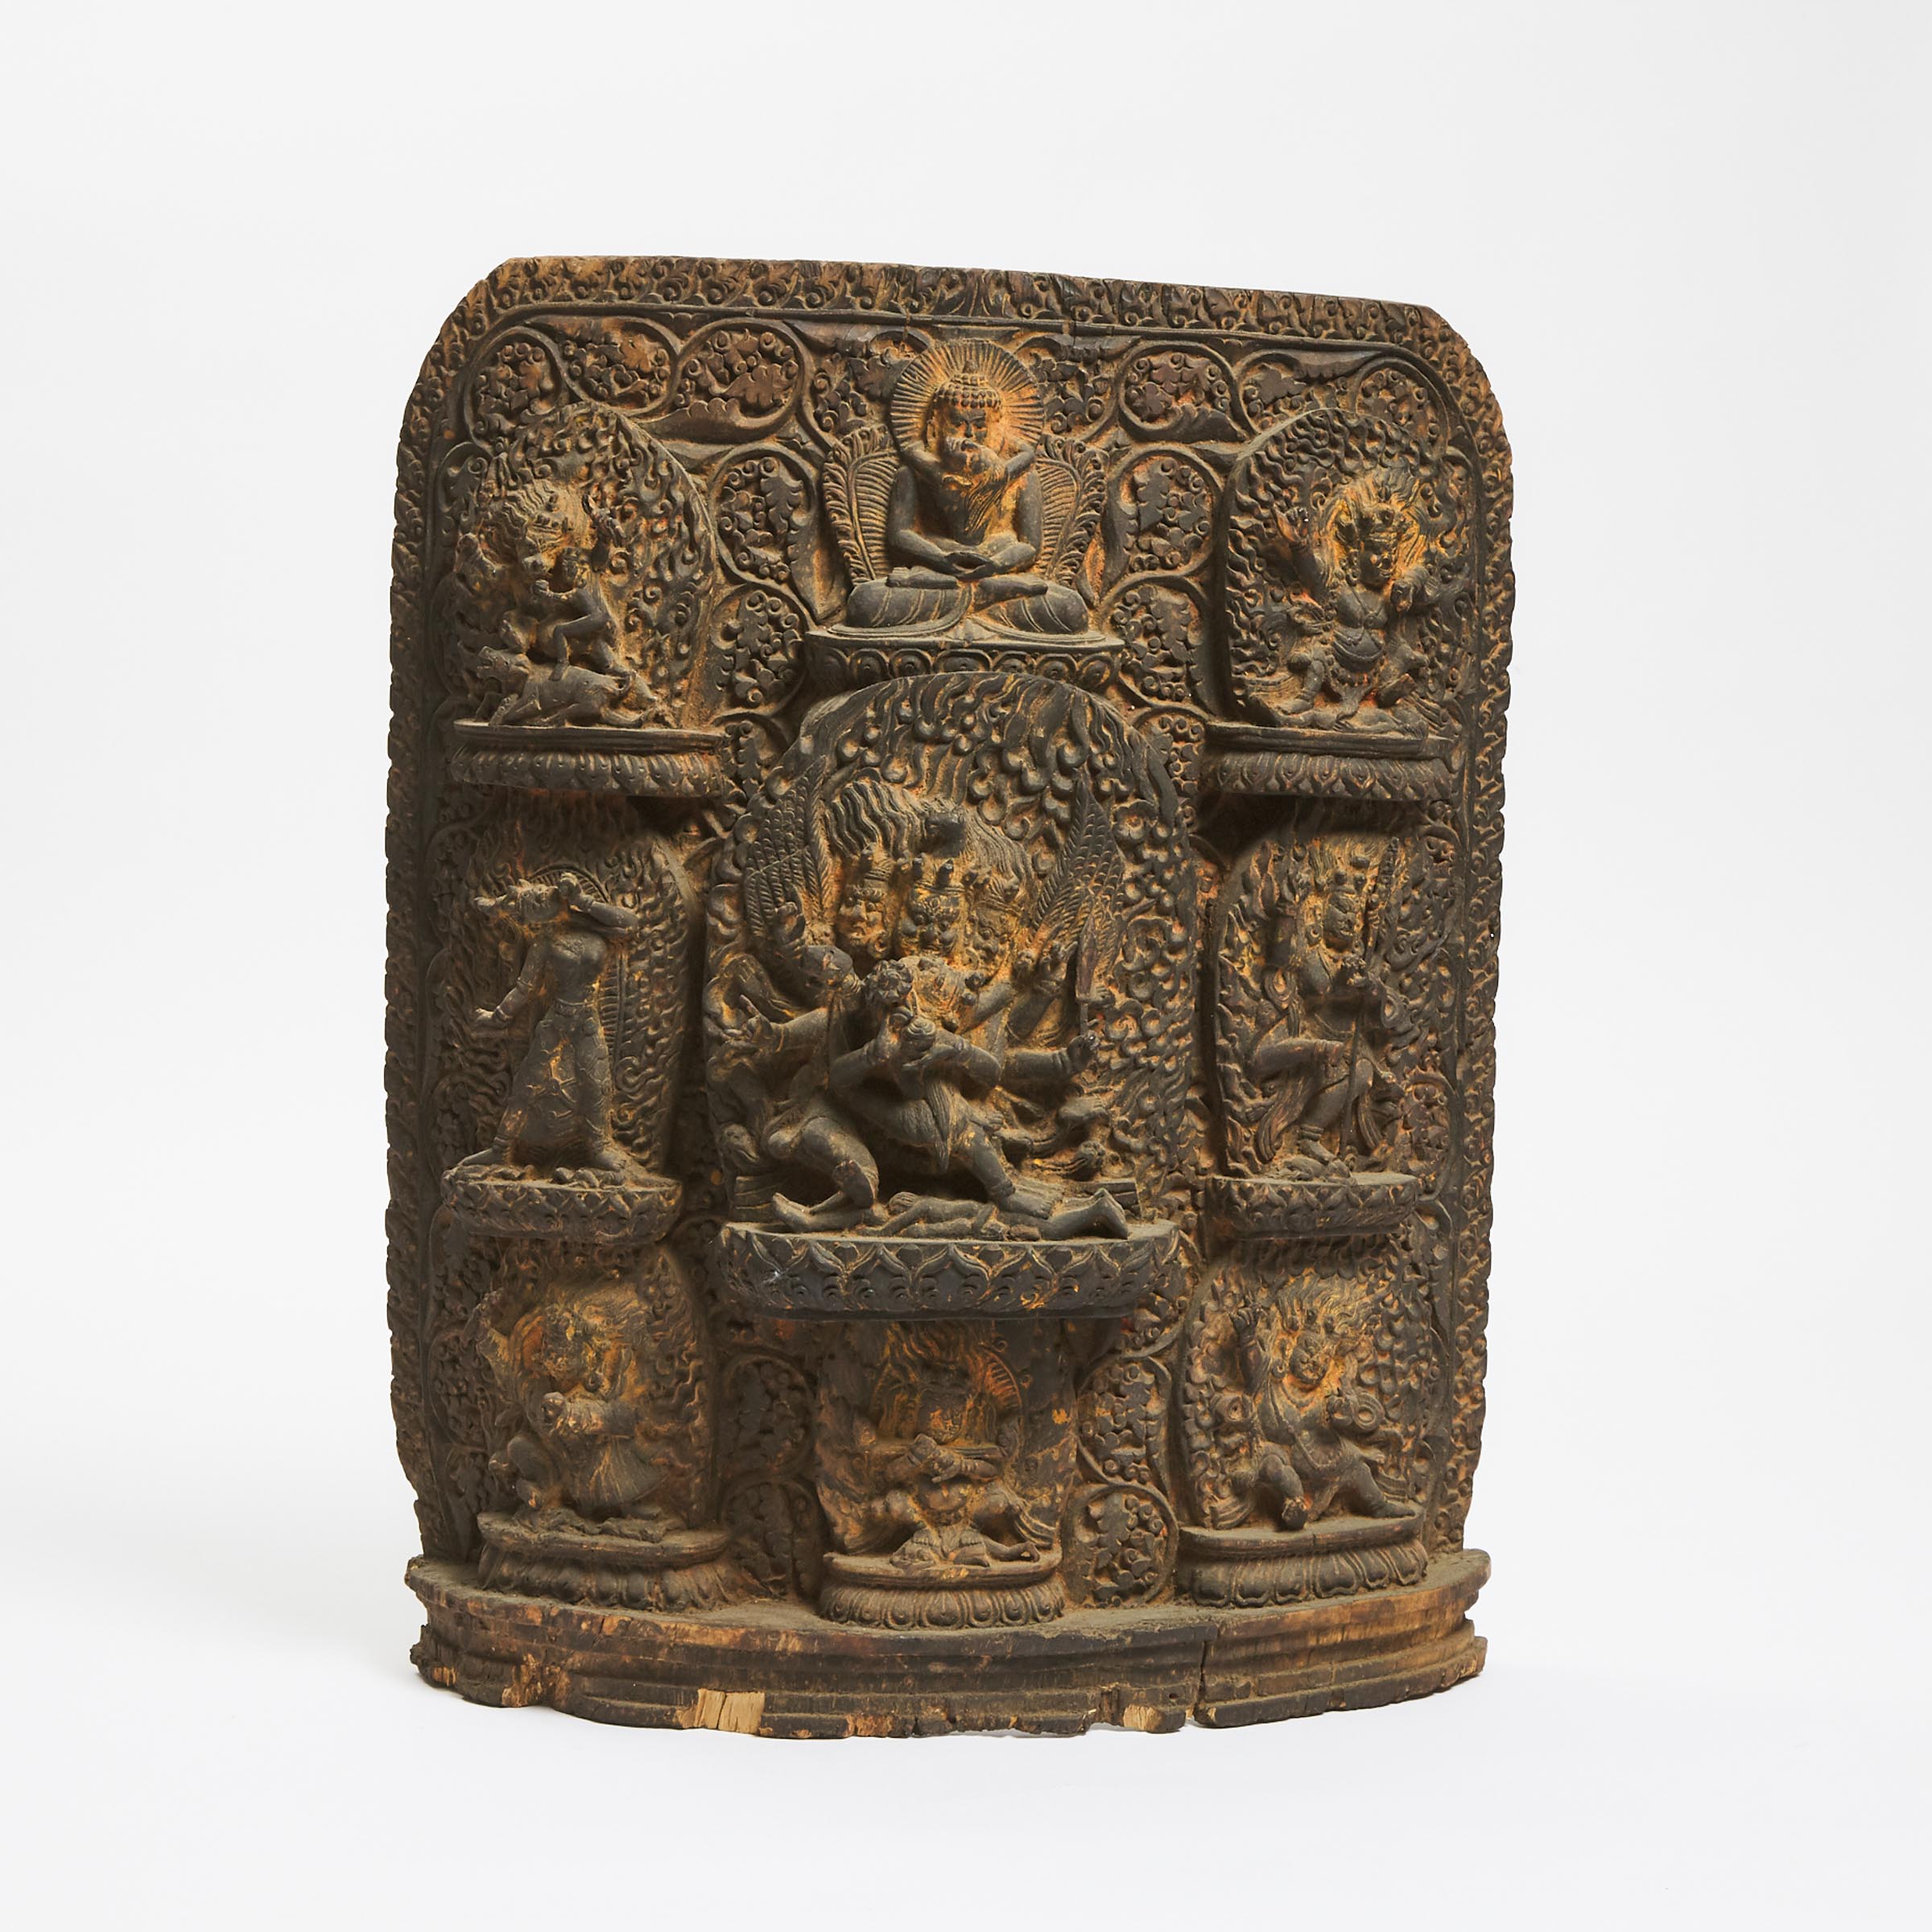 A Large Tibetan Wood Carved Relief,